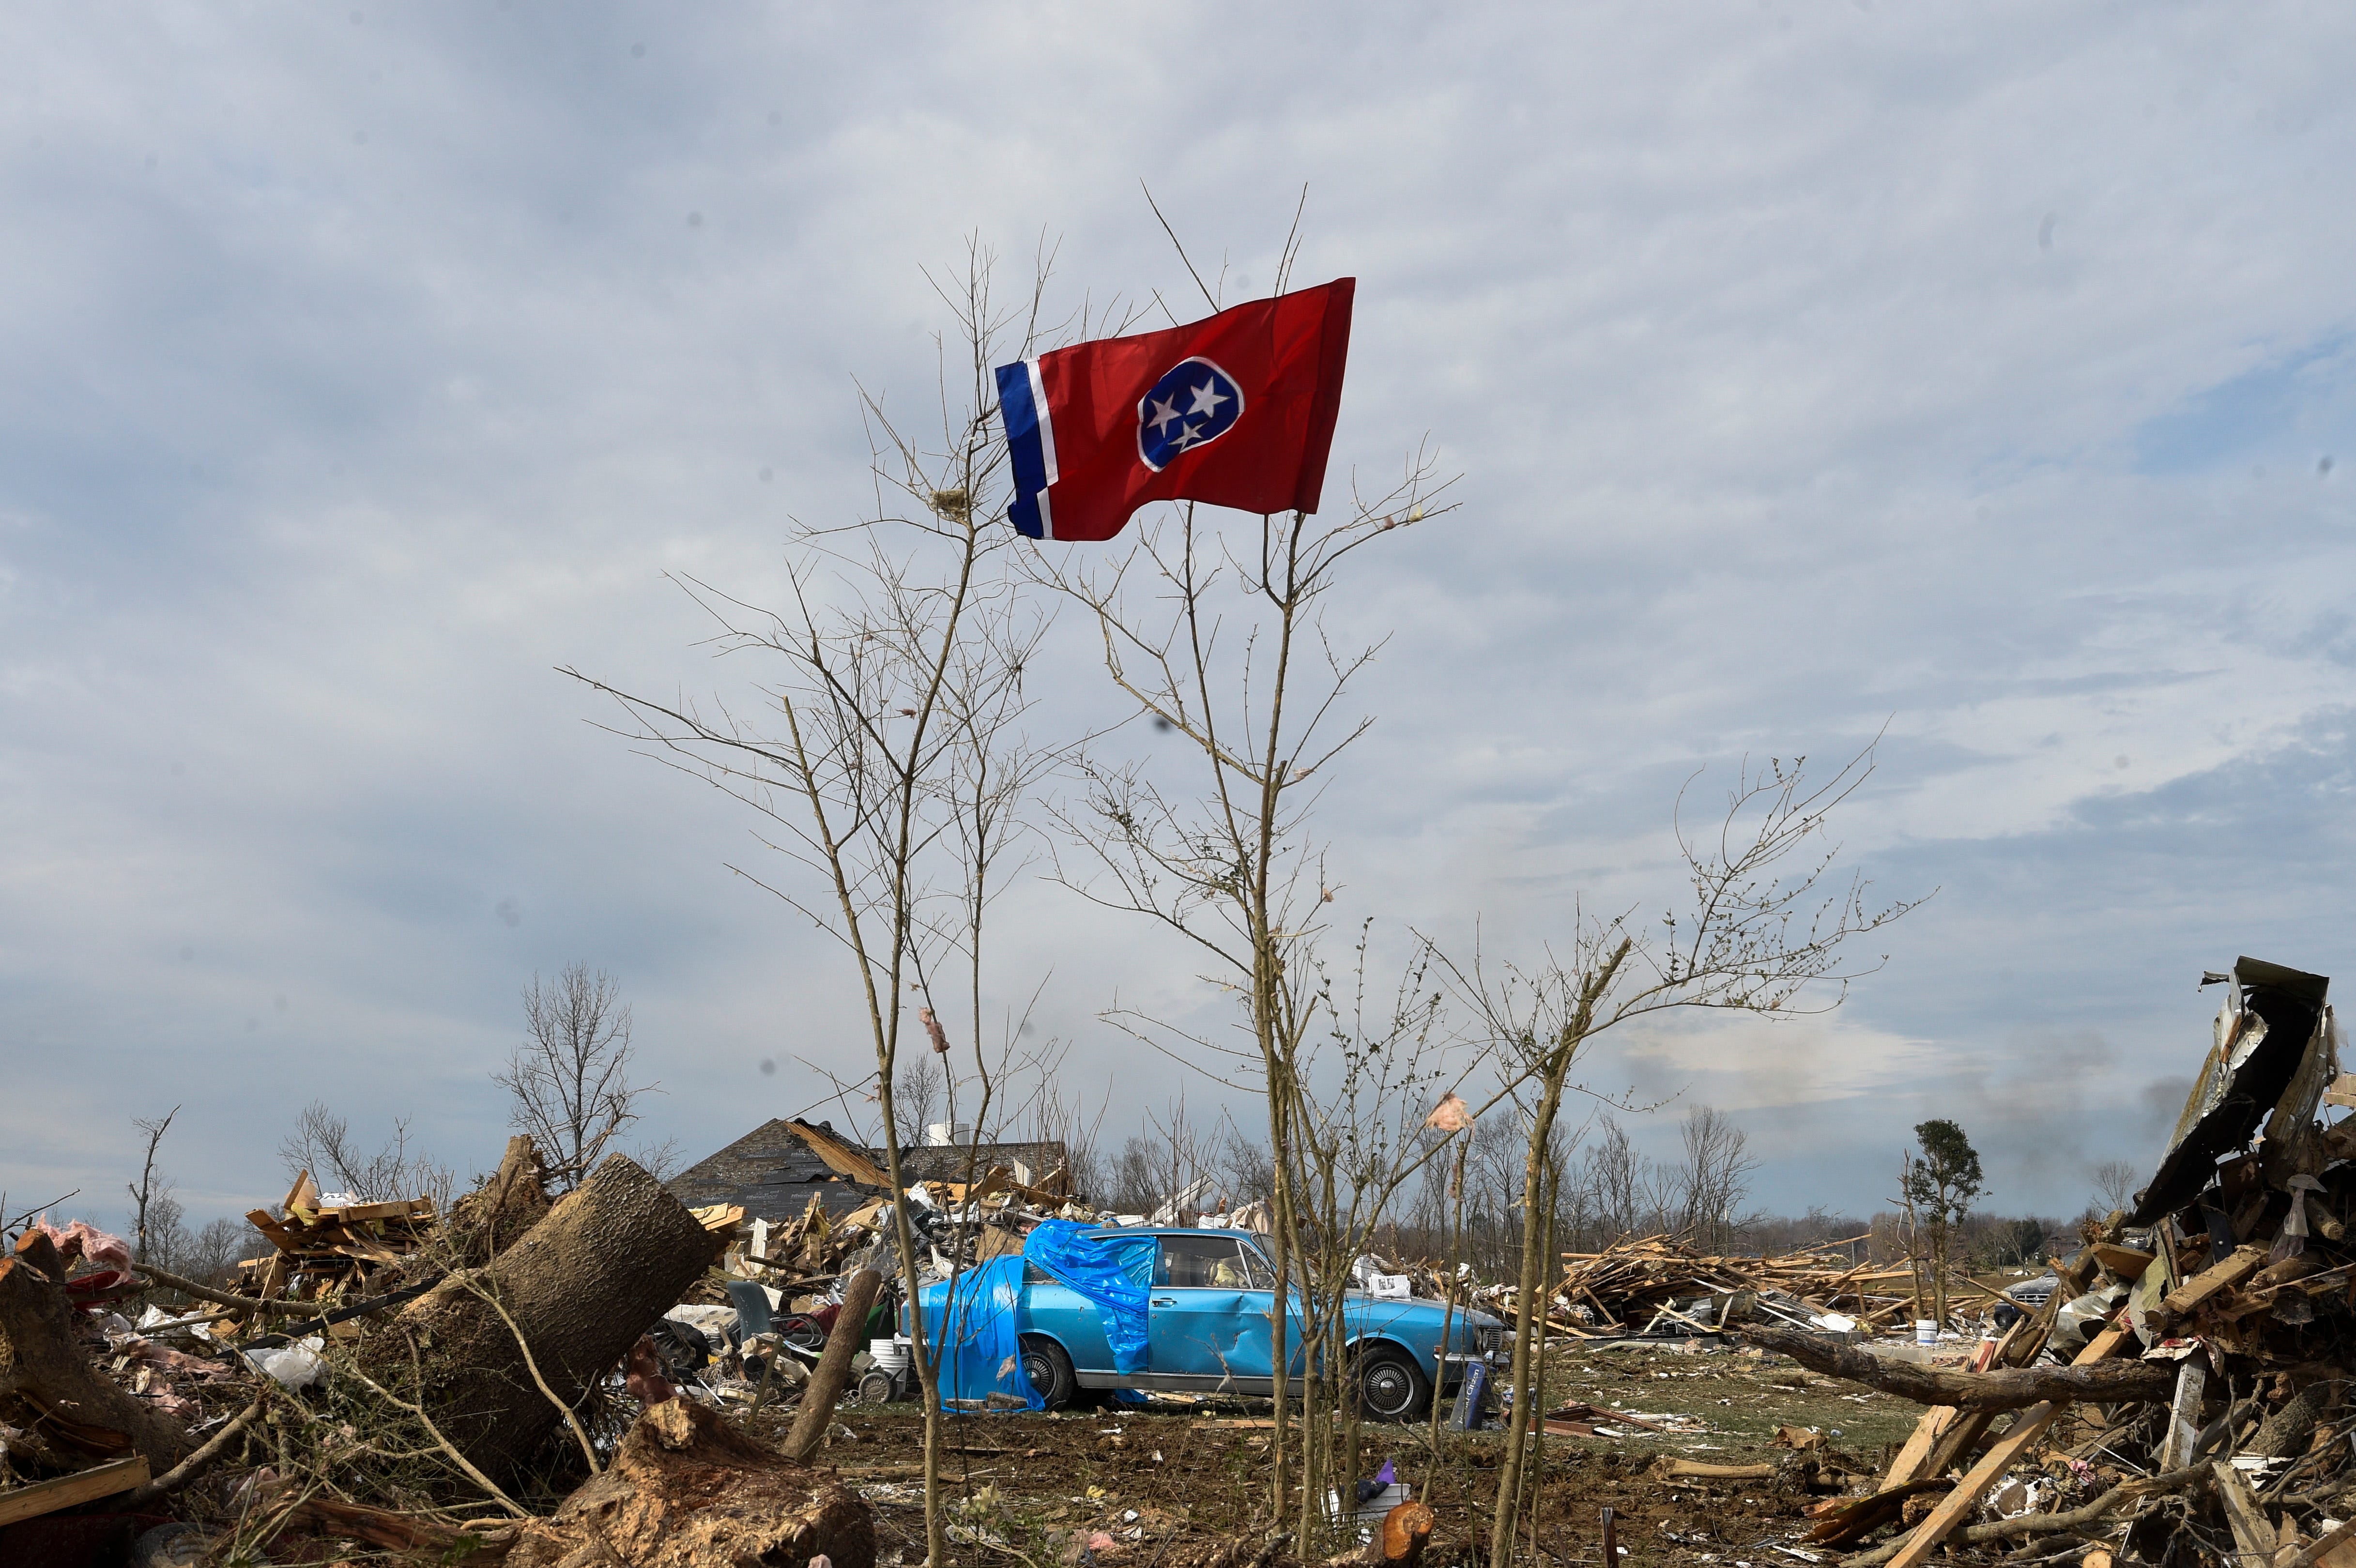 The state flag flies amid rubble on Charlton Square in Baxter, Tenn., on Wednesday, March 5, 2020.